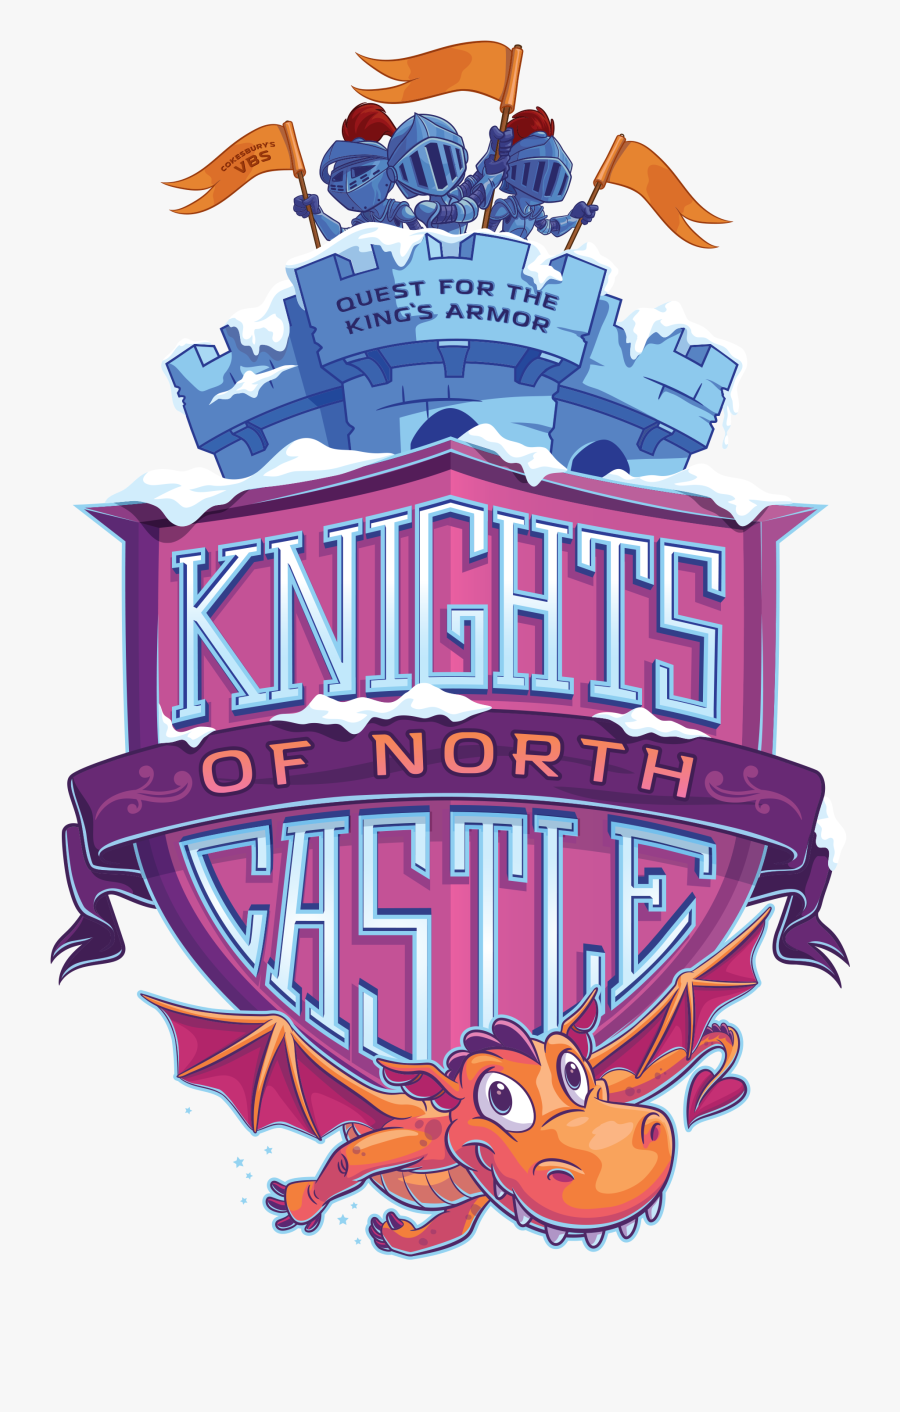 Cokesbury Vbs 2020 Knights Of The North Castle Cokesbury Vbs 2020